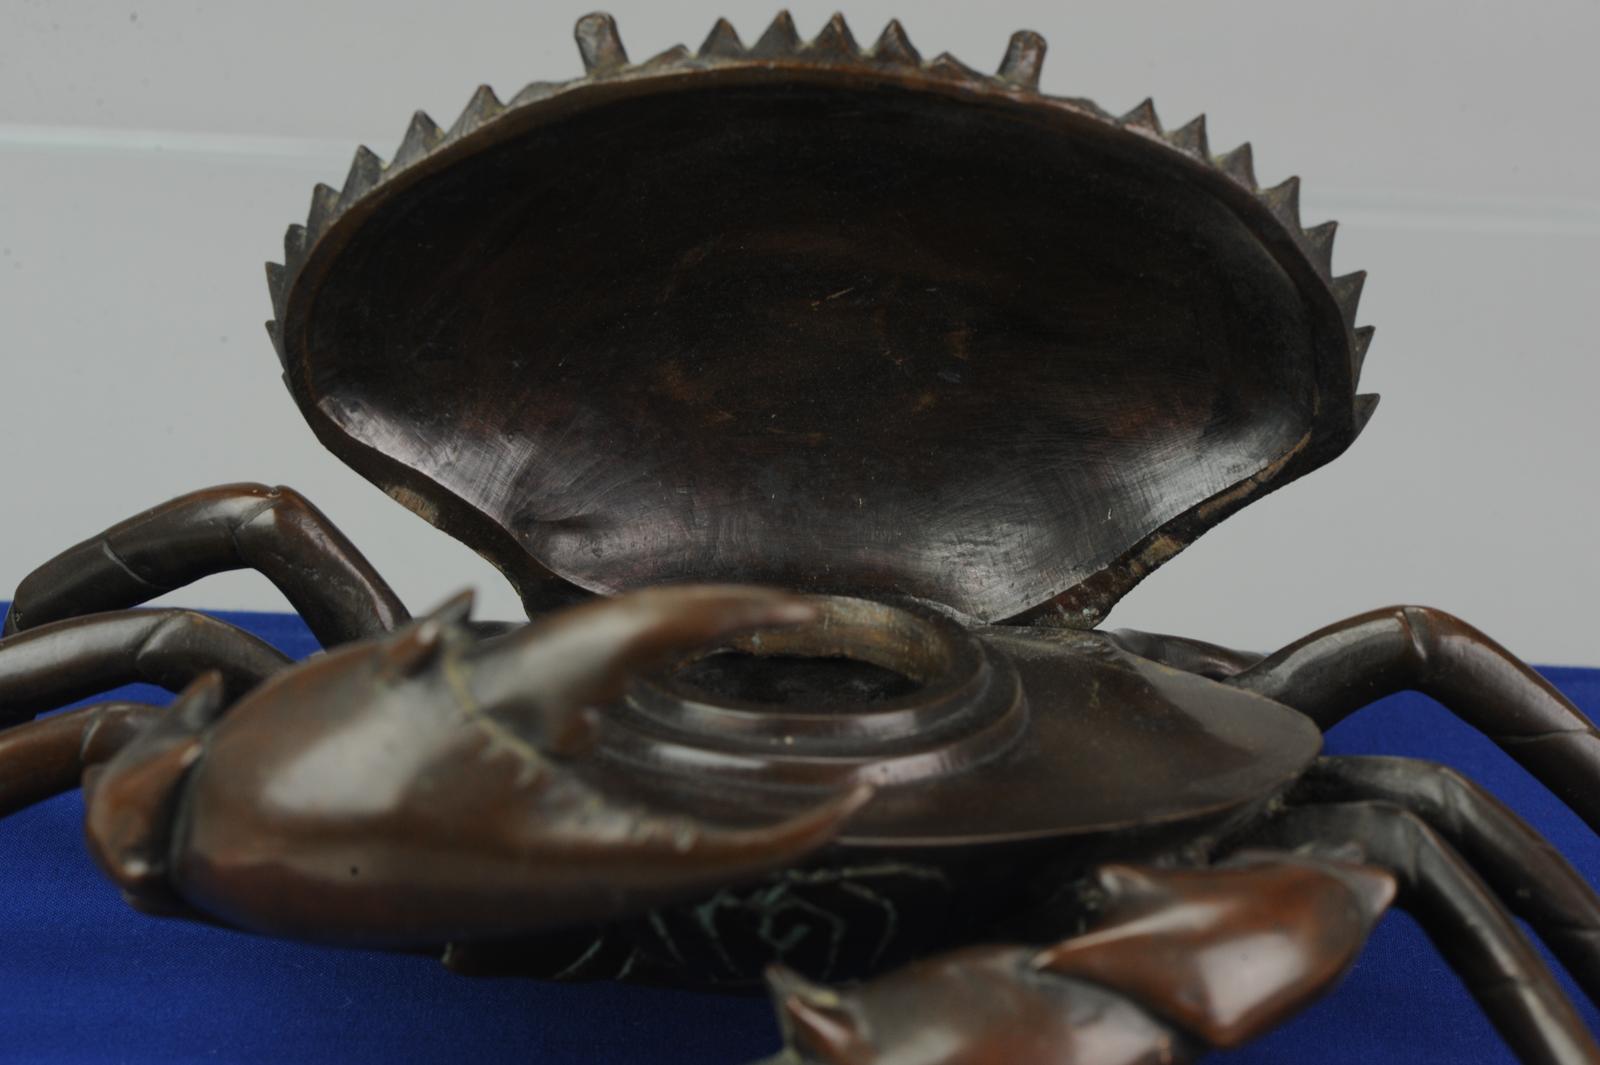 Antique Bronze Meiji Okimono Inkpot of a Crab, 19th Century, Japan, Japanese In Good Condition For Sale In Amsterdam, Noord Holland